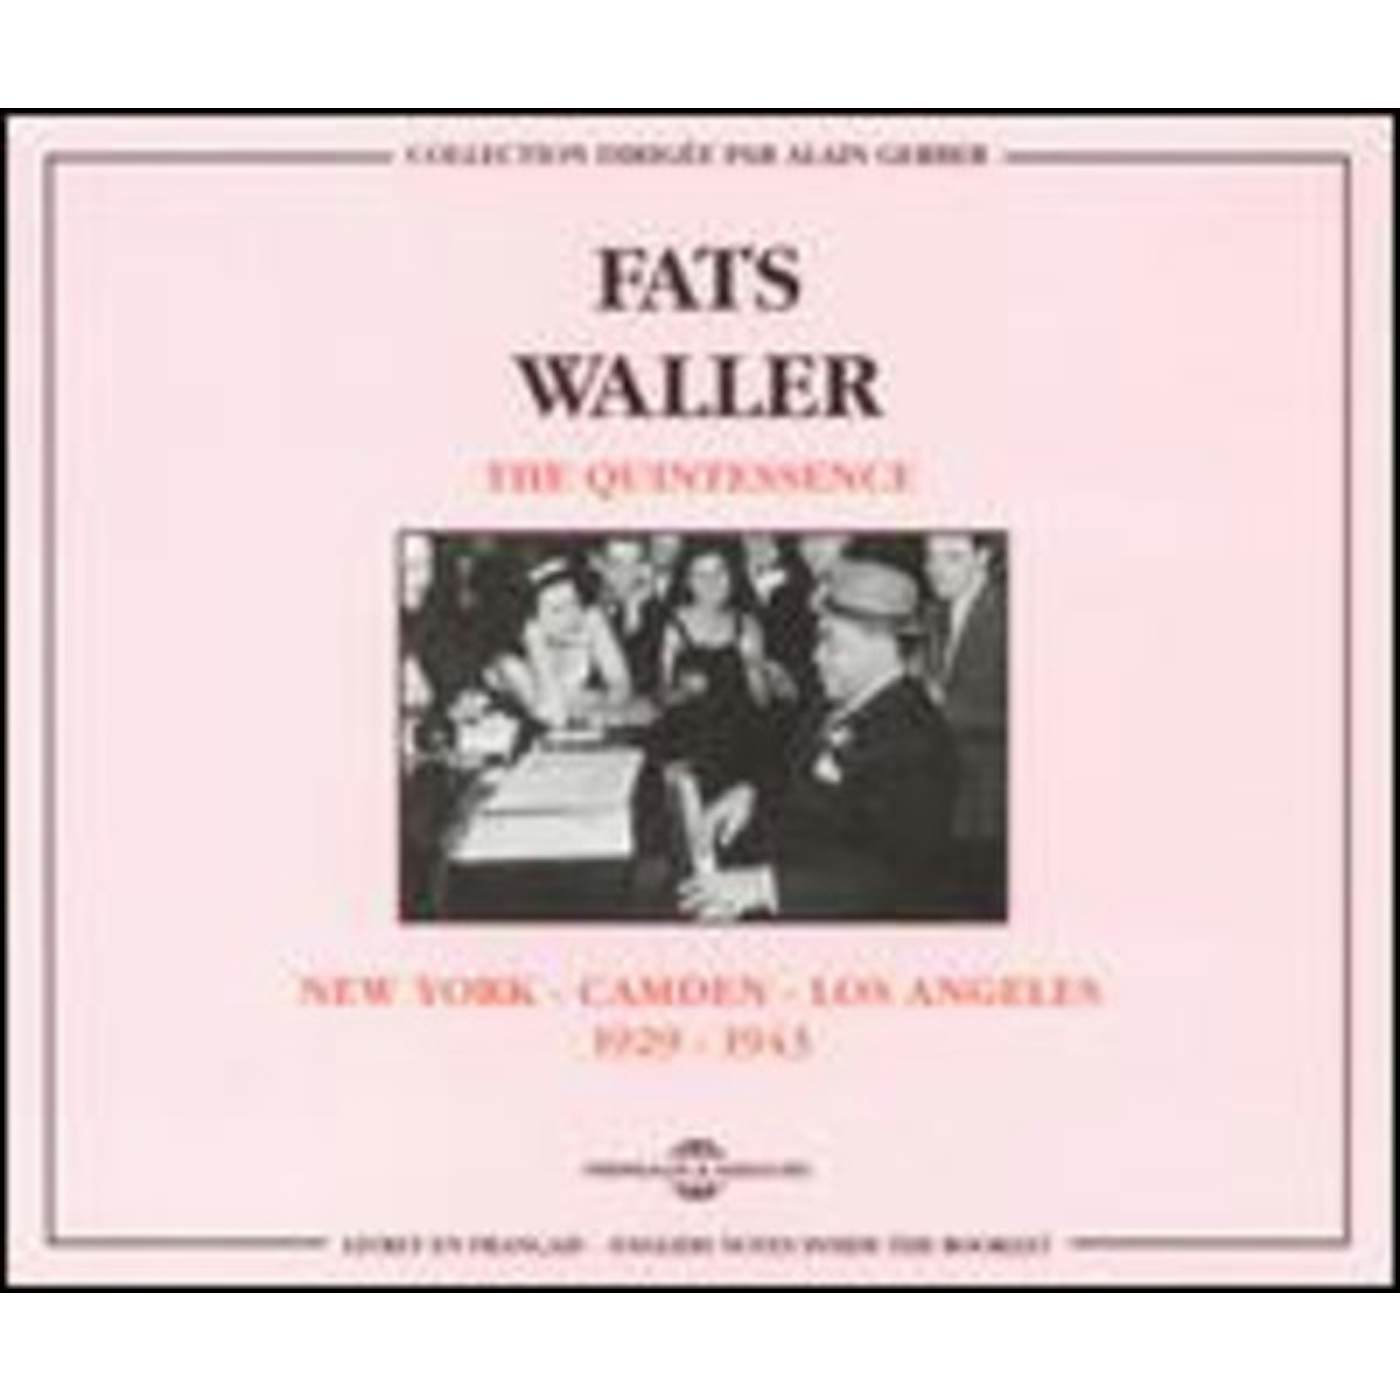 Fats Waller NEW YORK TO CAMDEN TO LOS ANGELES 1929-1943 CD